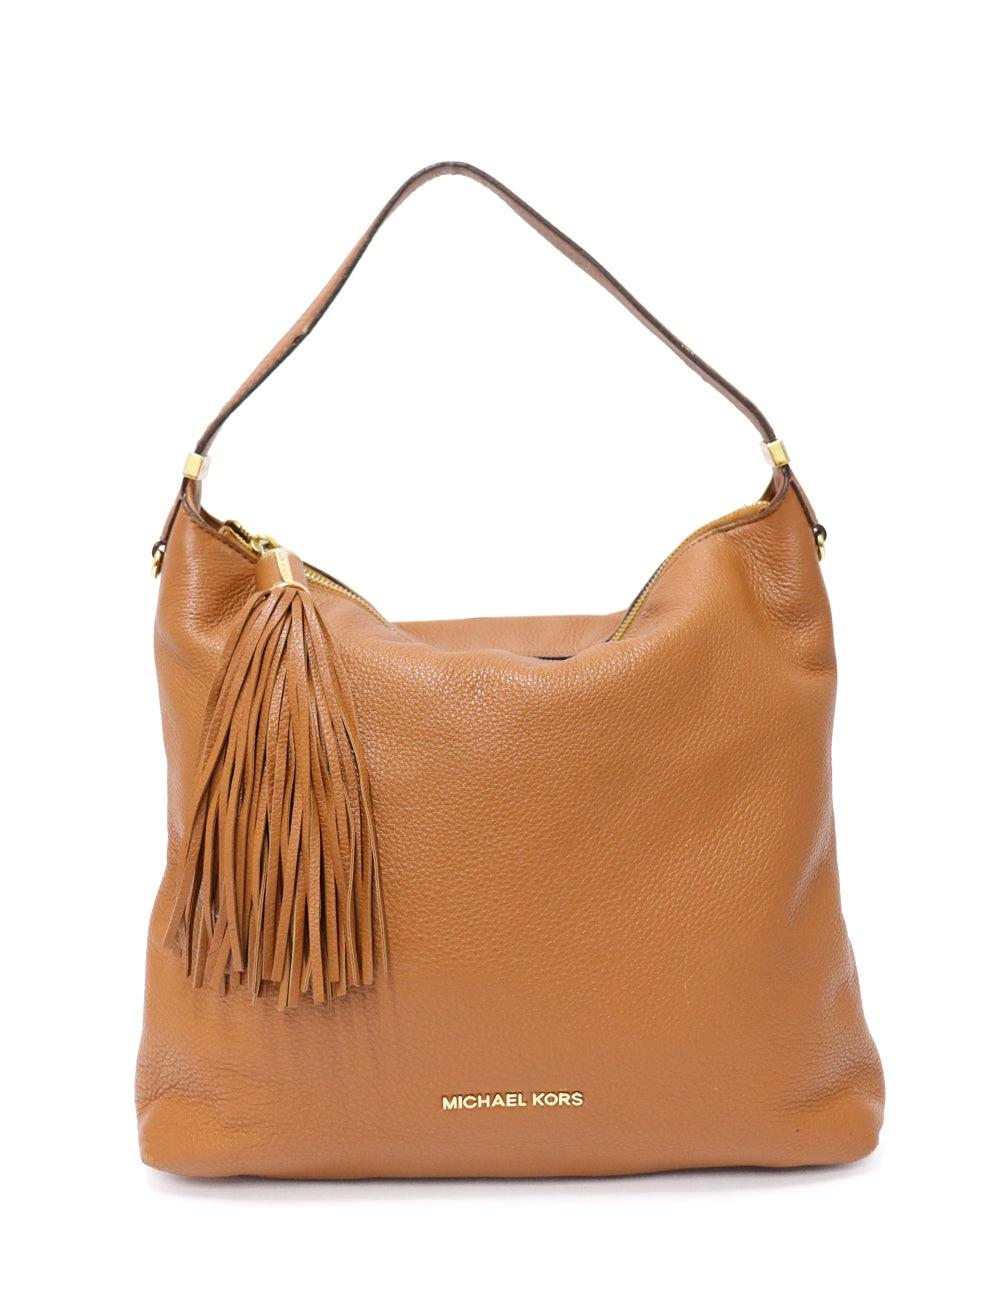 Michael Kors Tan shoulder bag with a fringe details in an great condition.

Additional information:
Material: Leather
Hardware: Gold
Measurements: 33 W x 10 D x 27 H cm
Handle Drop: 20 cm
Overall condition: Good
Interior condition: Signs of